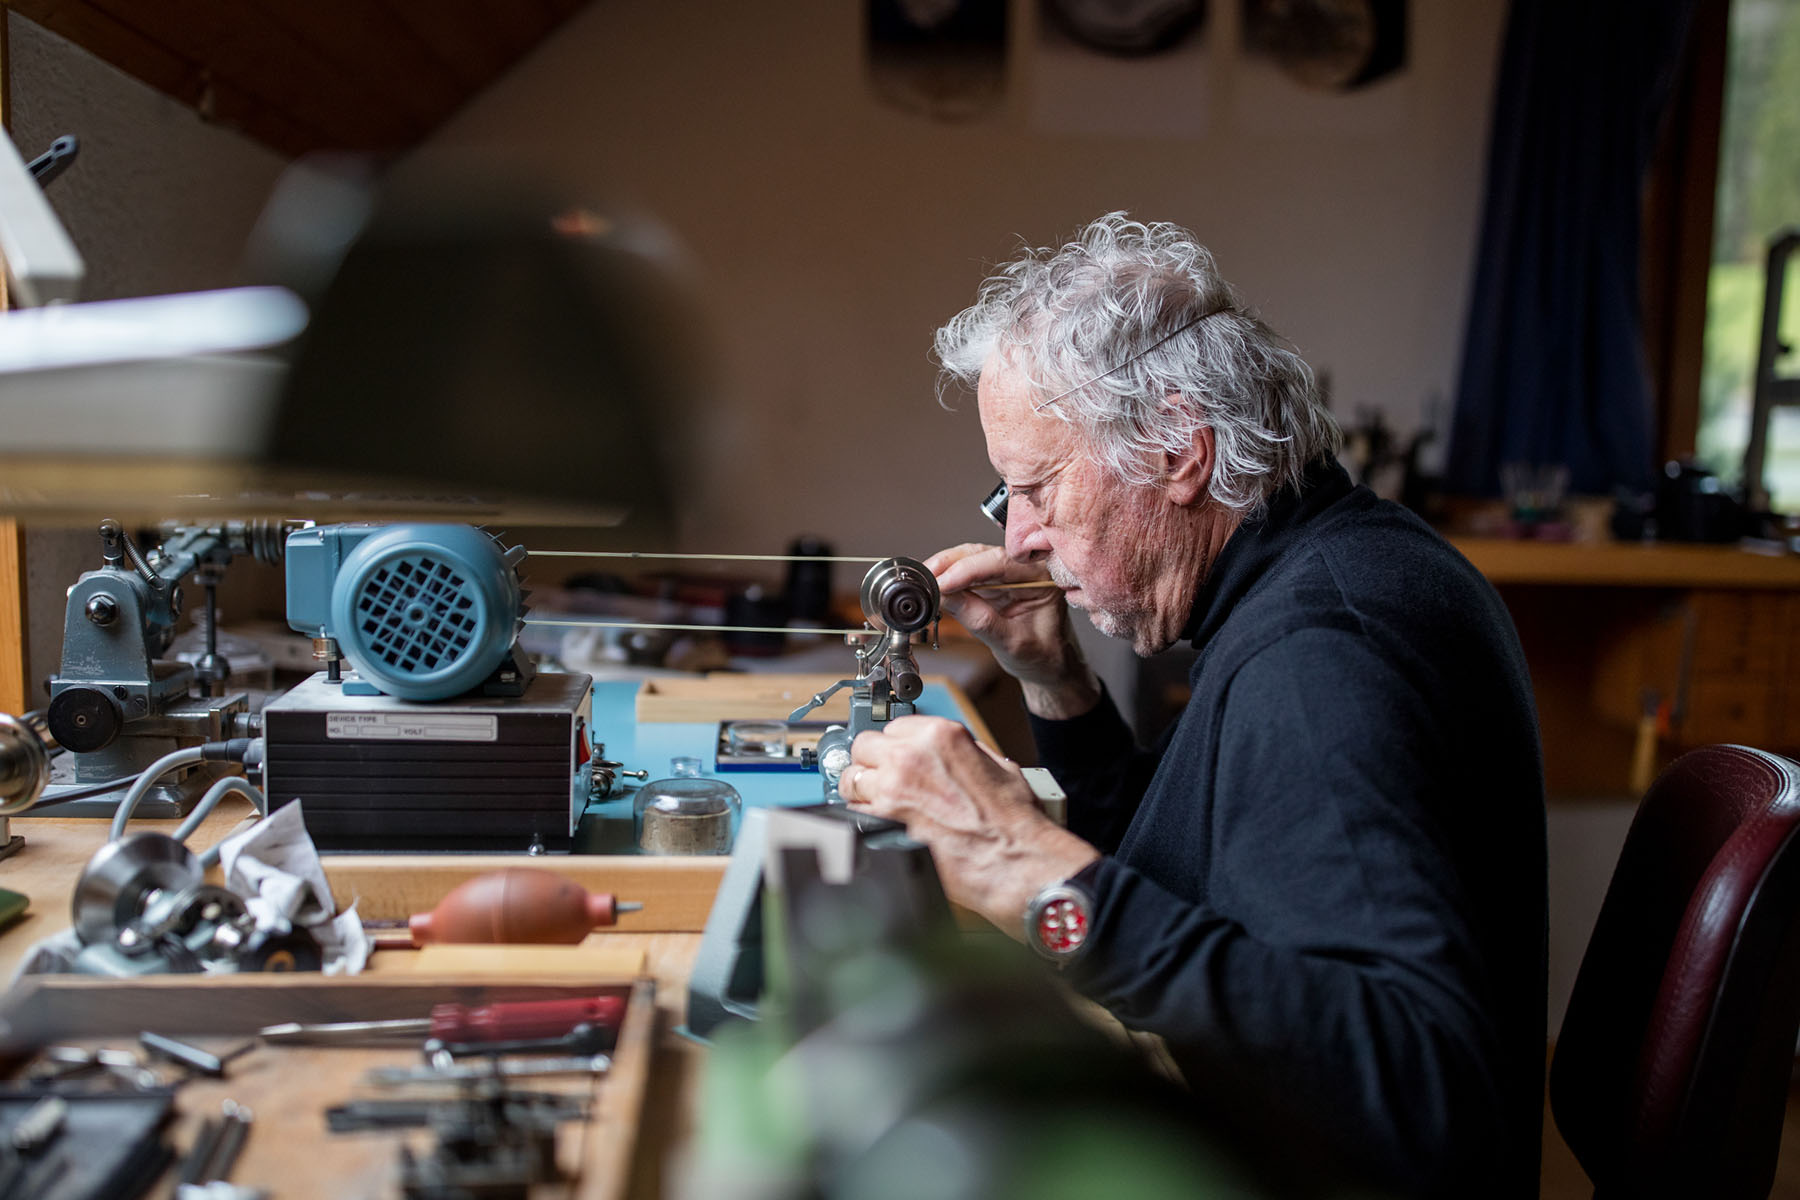 A Complete Collector's Guide to Daniel Roth and His Career from Breguet to Jean Daniel Nicolas